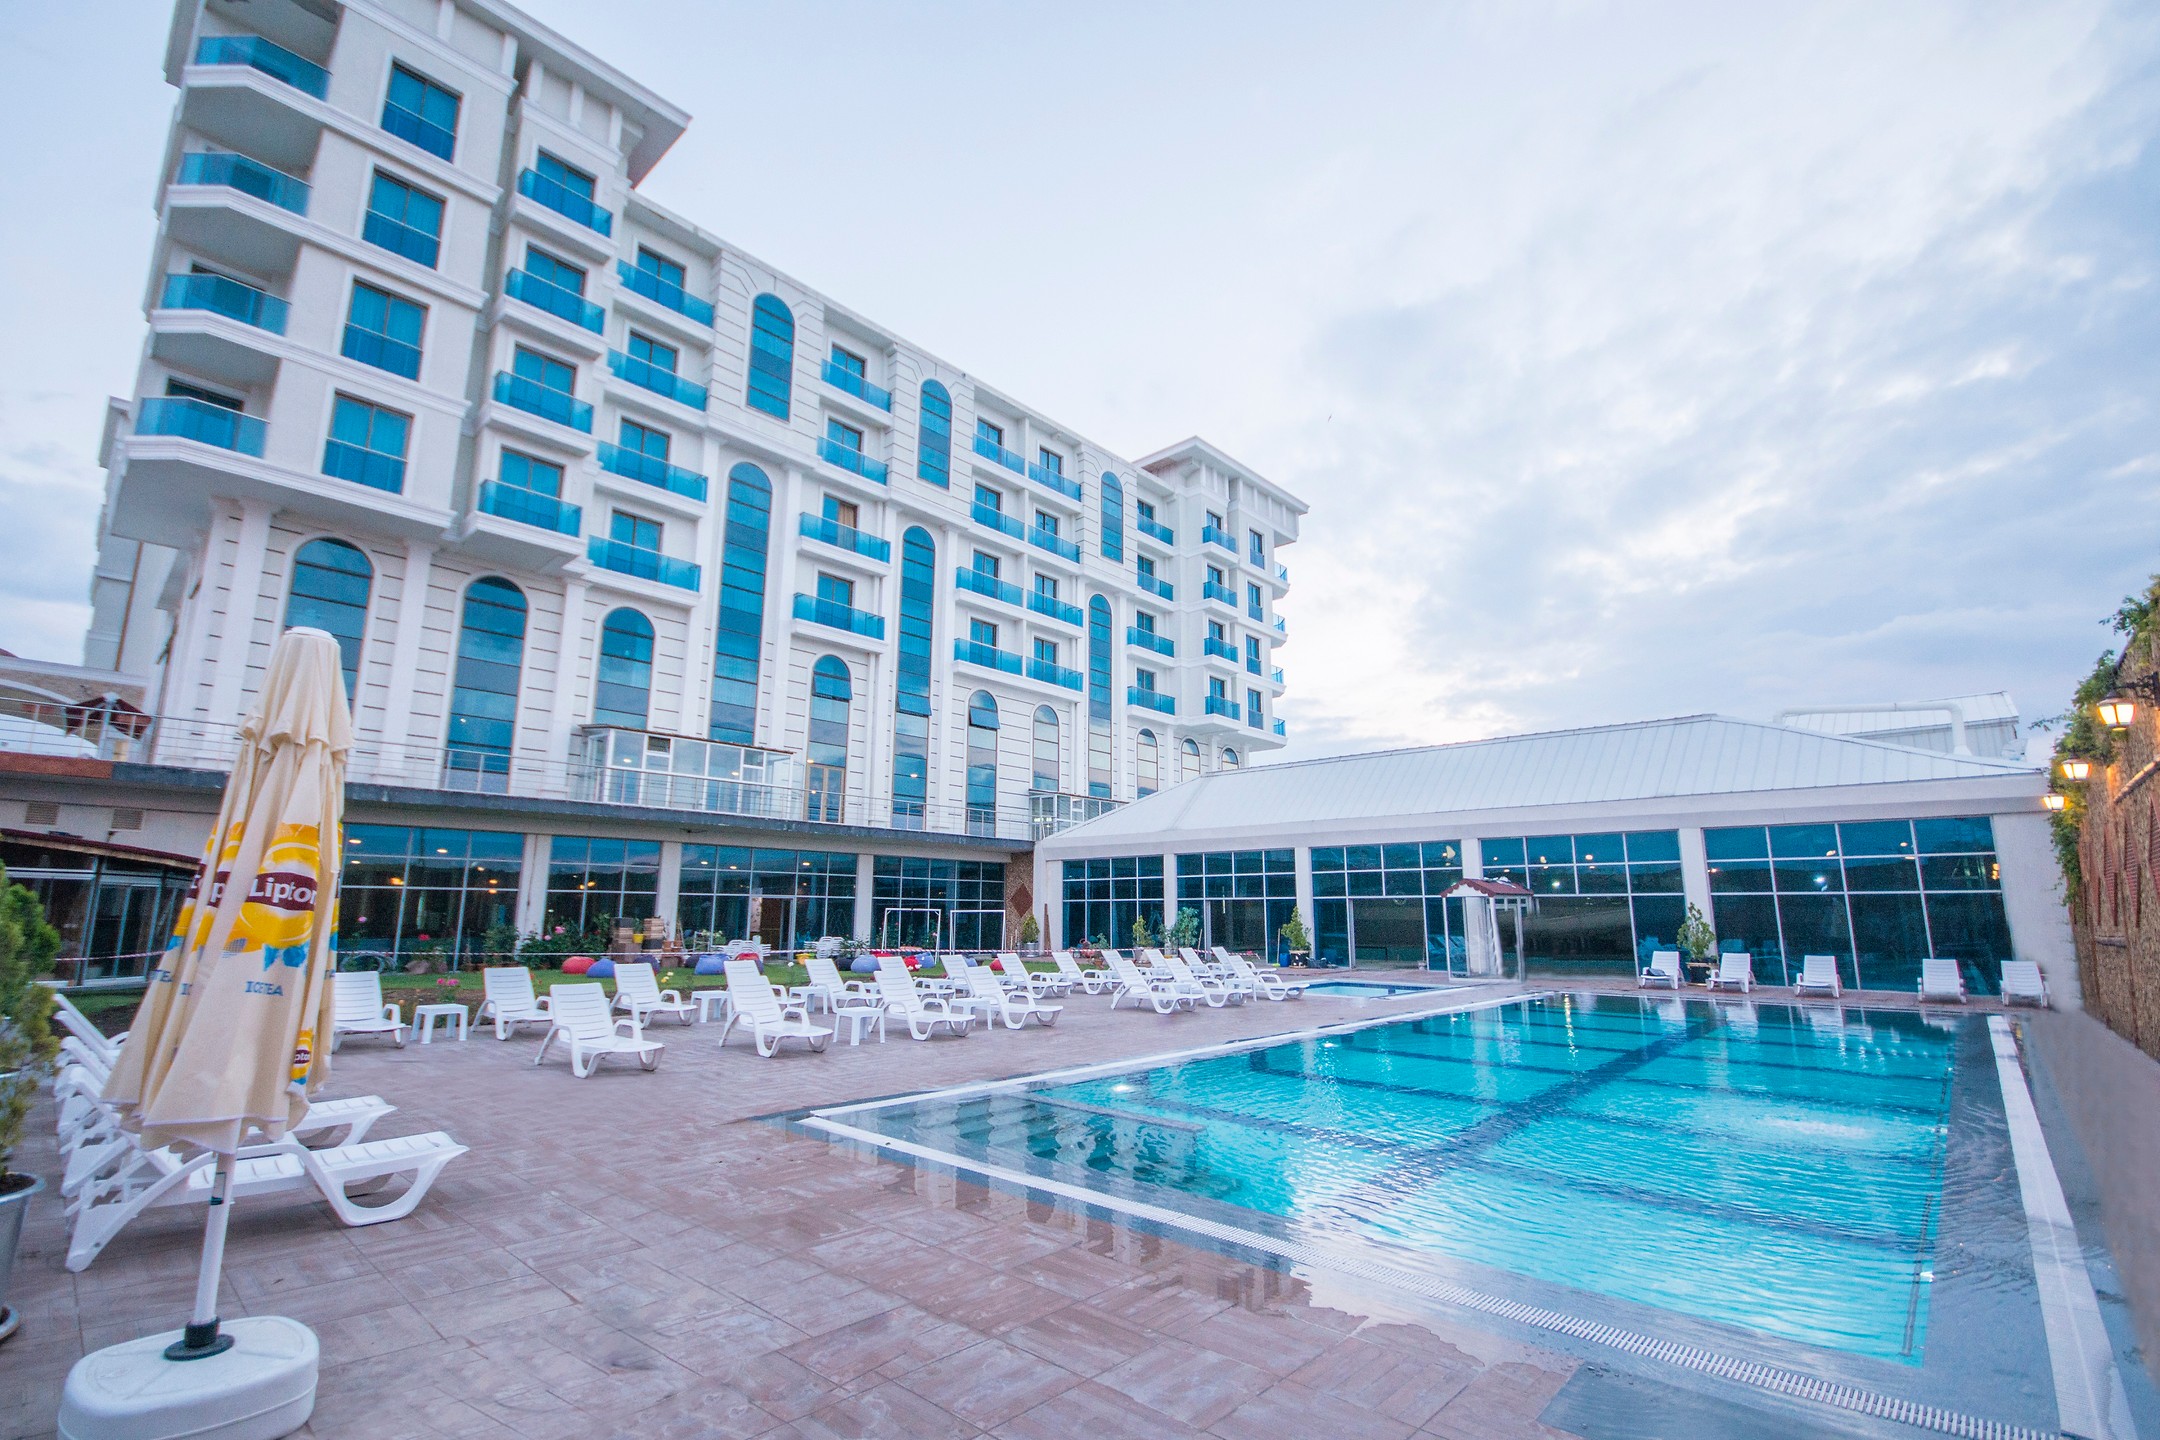 Budan Thermal & Spa Hotel Convention Center